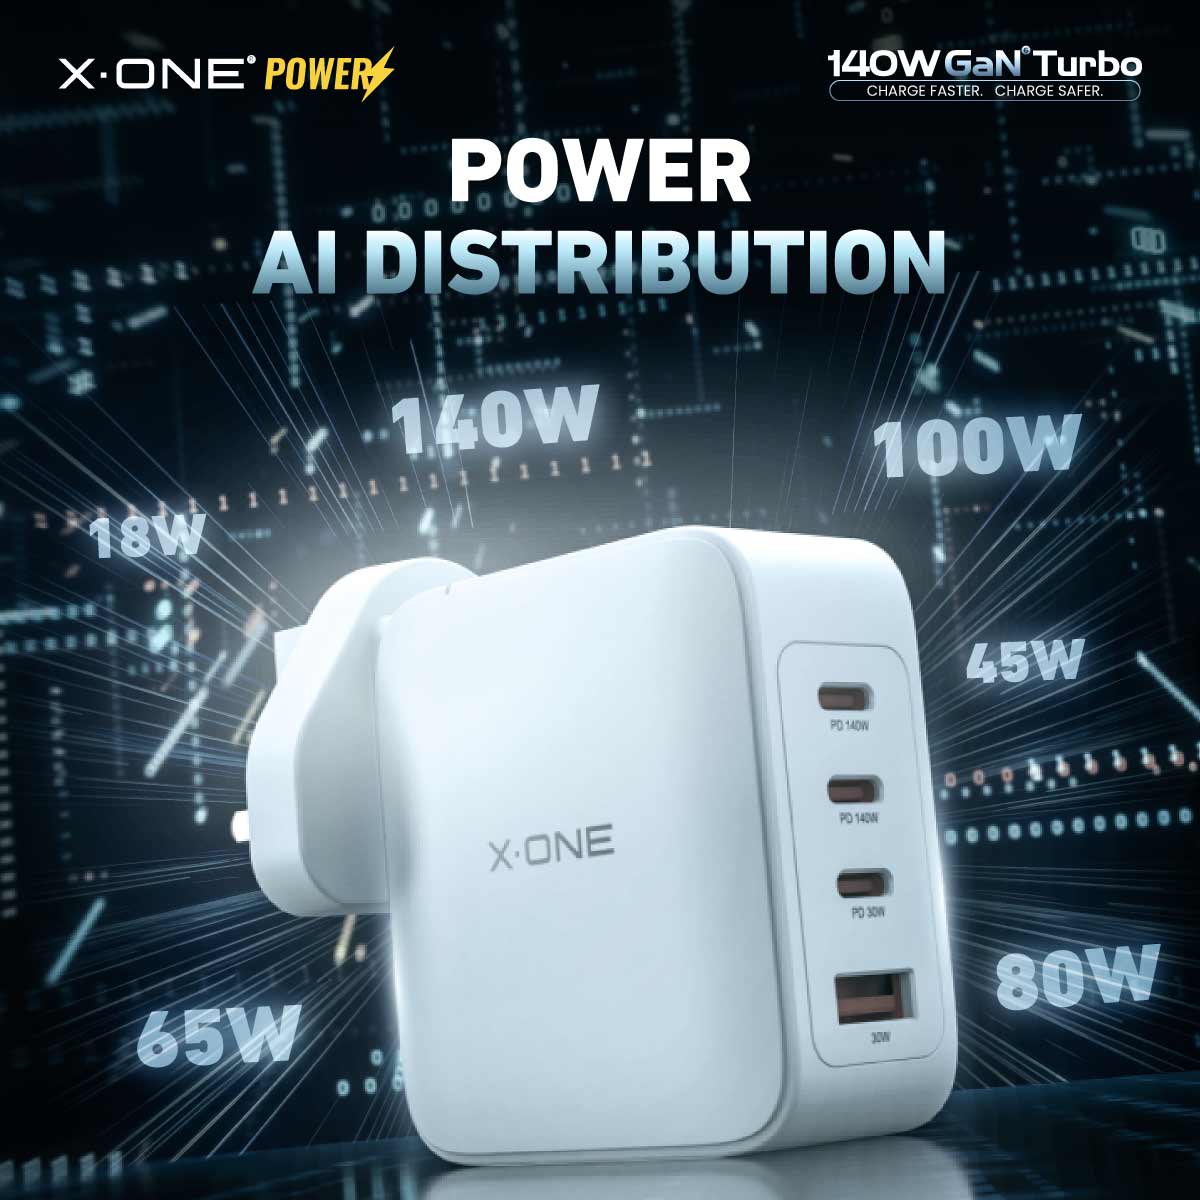 X.One® 140W GaN 6 Turbo Ultra Fast Charger (4-Ports)